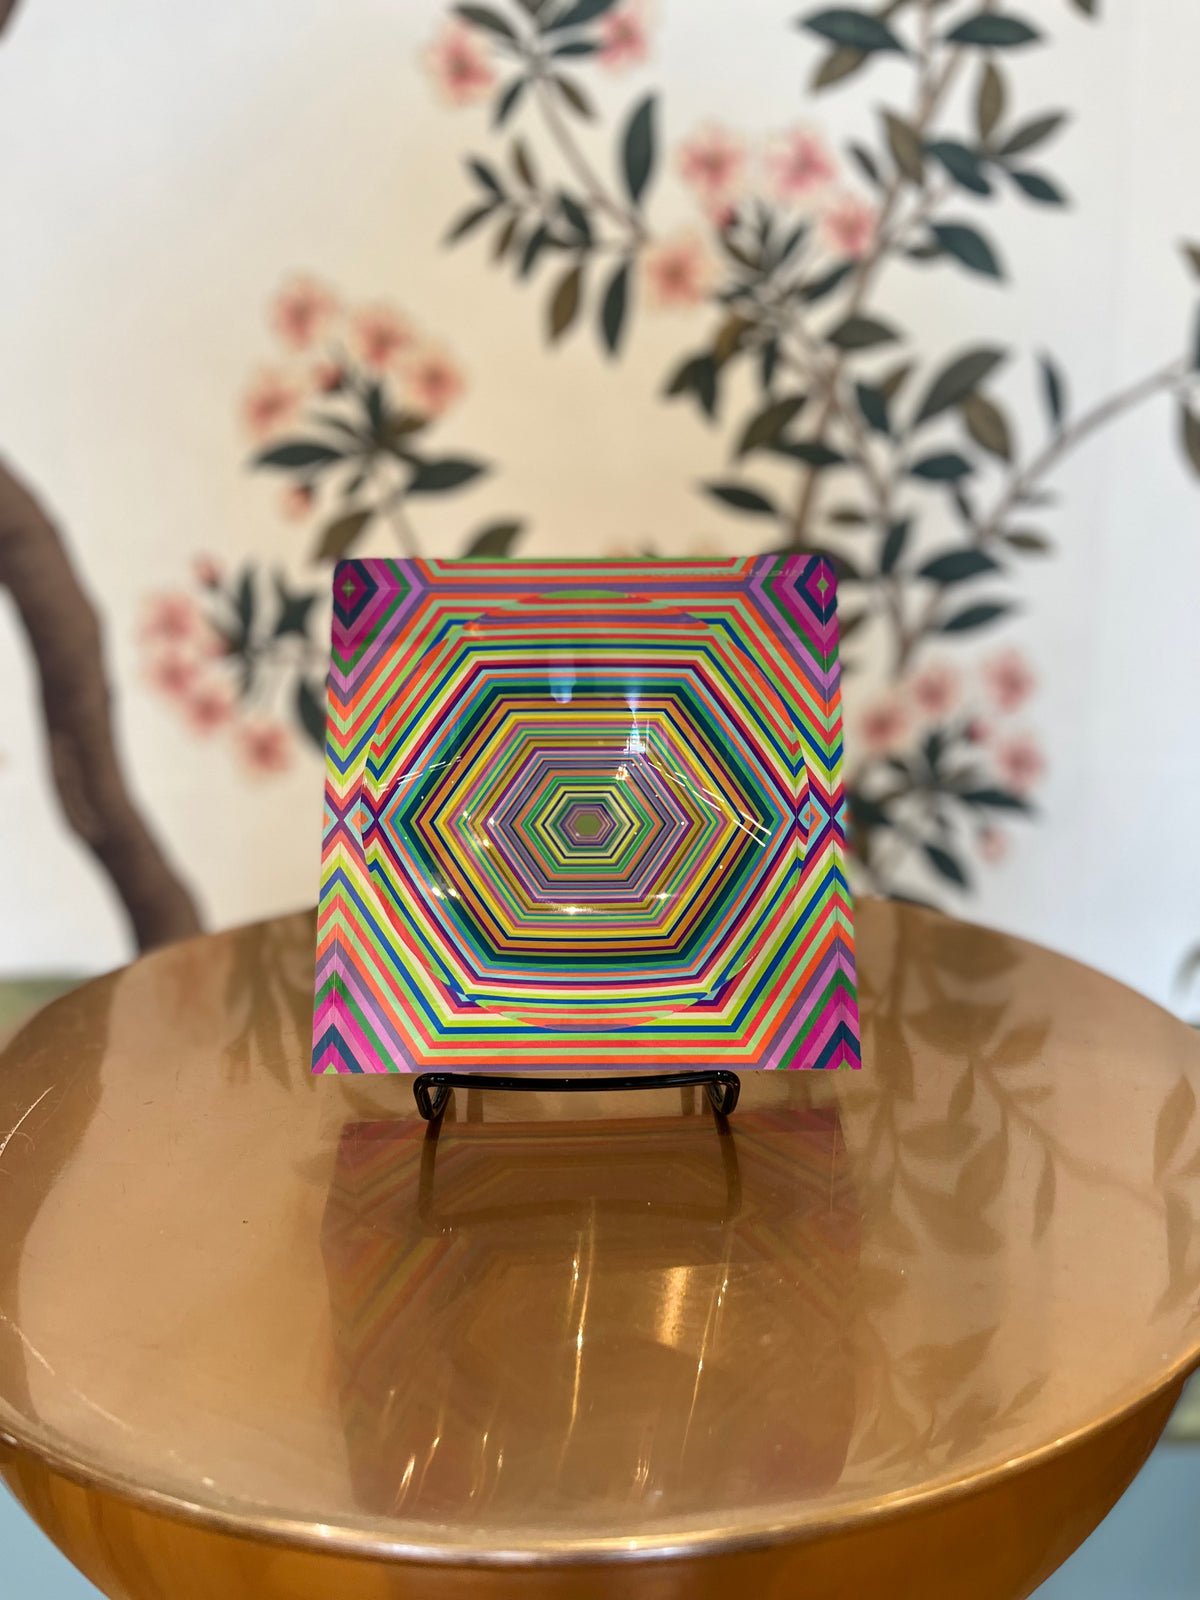 Hex Dylan Acrylic Candy Tray | Nicolette Mayer